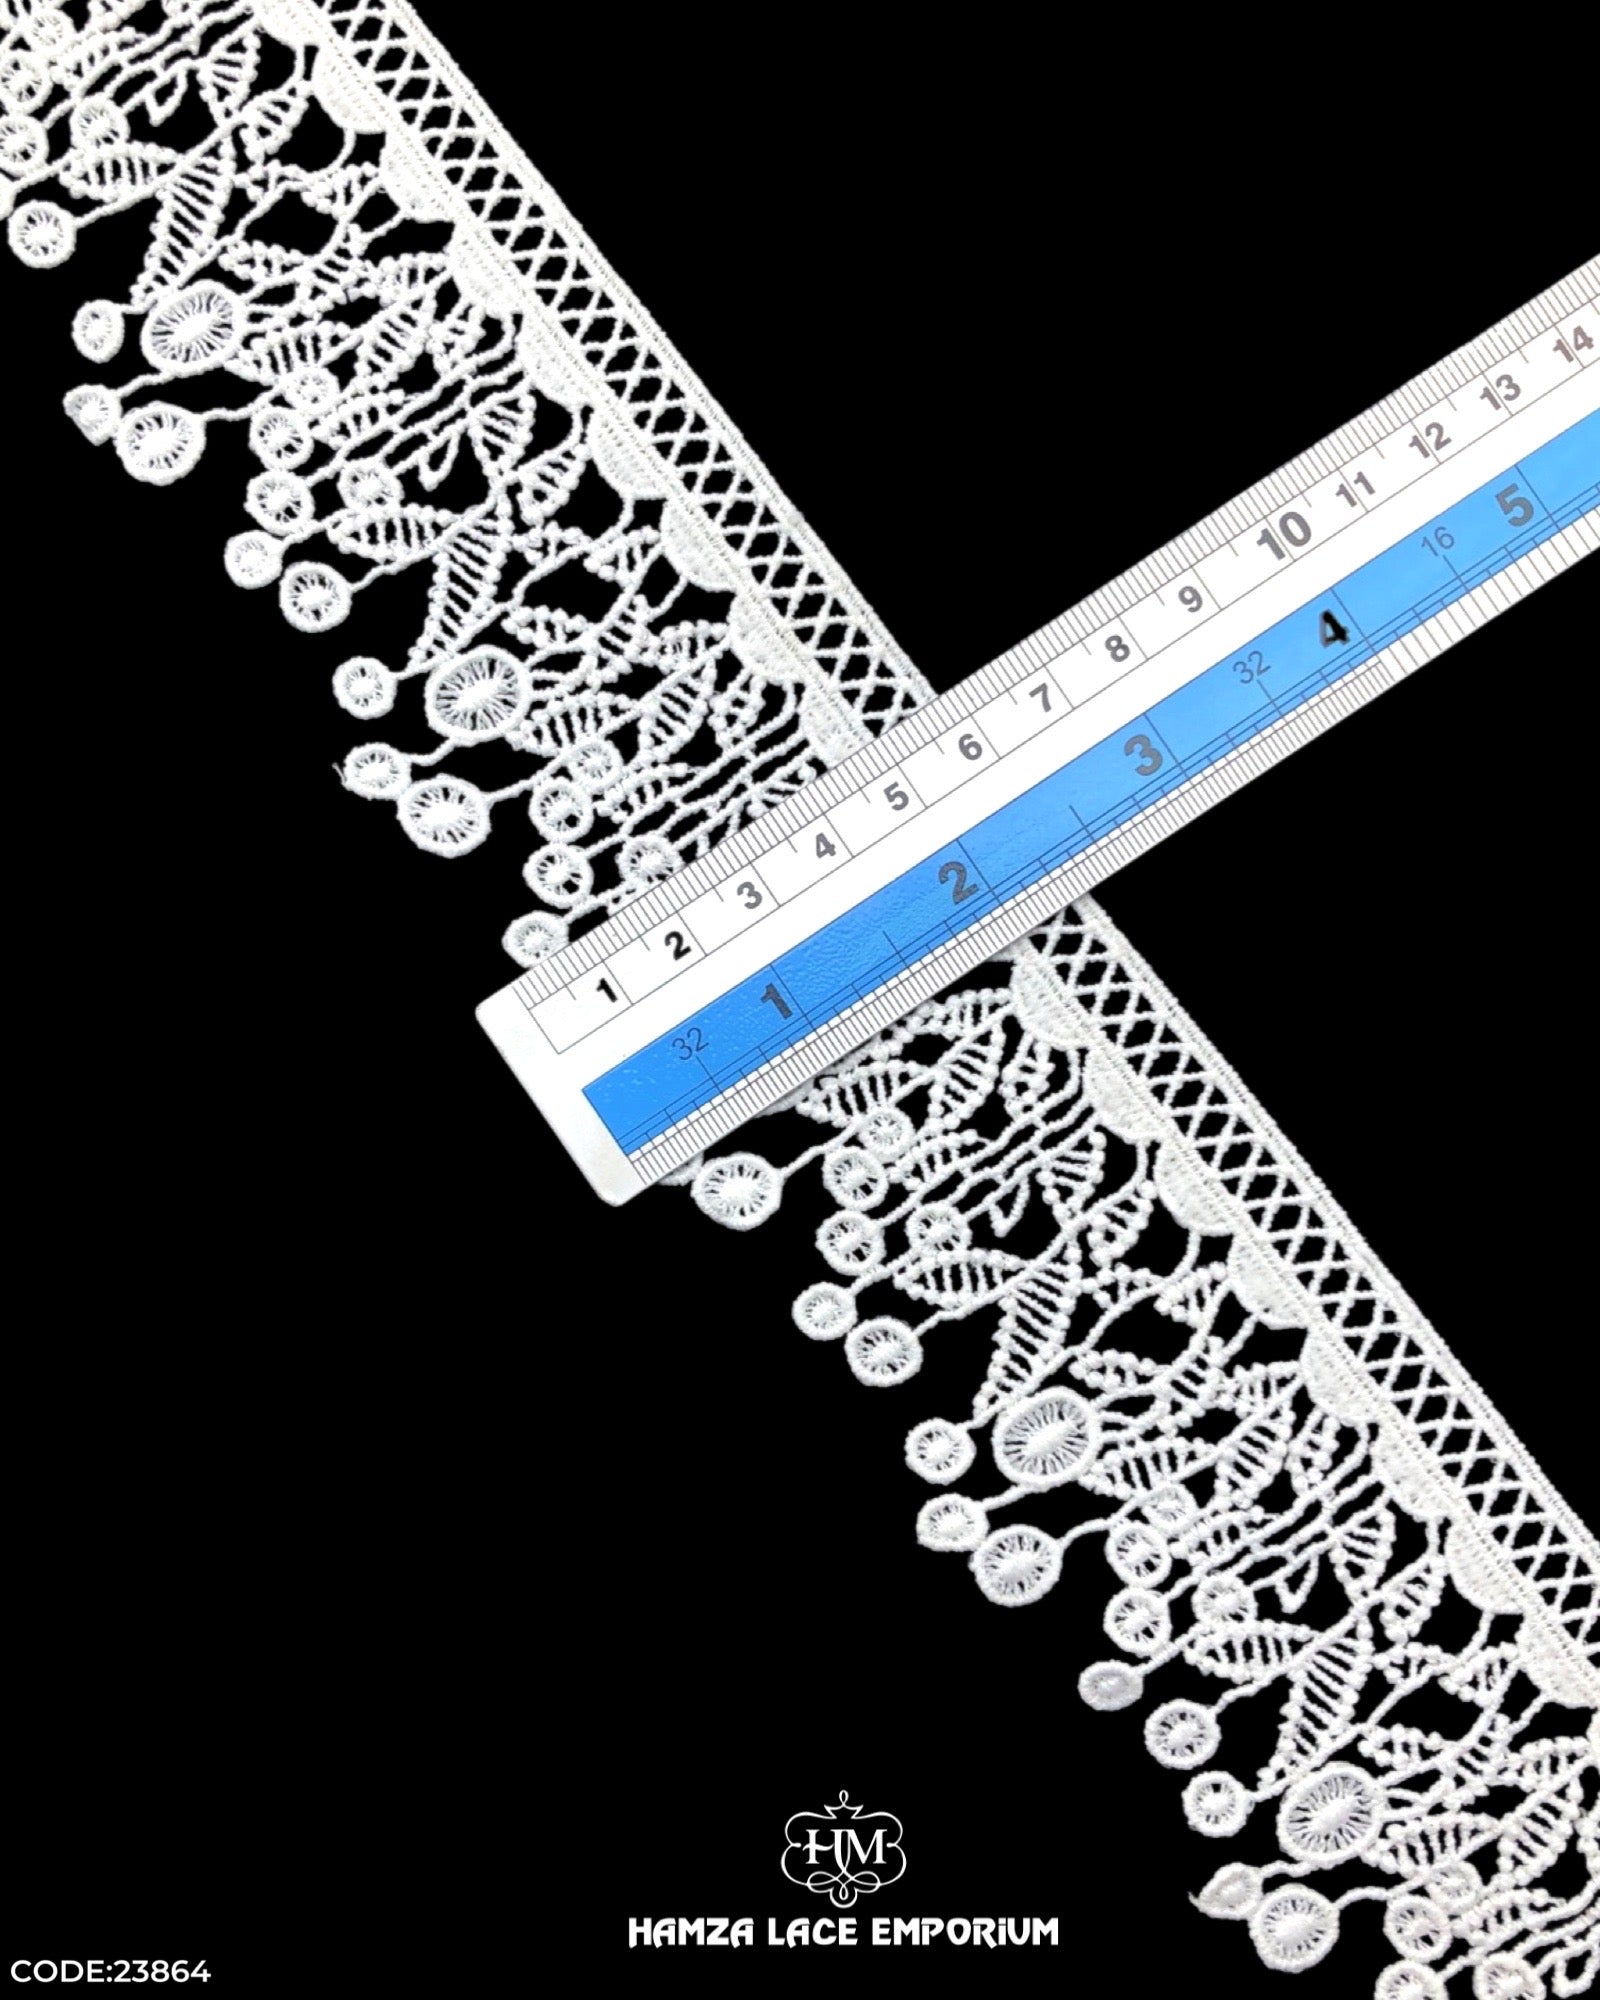 Size of the 'Edging Flower Design Lace 23864' is given with the help of a ruler as '2.25' inches